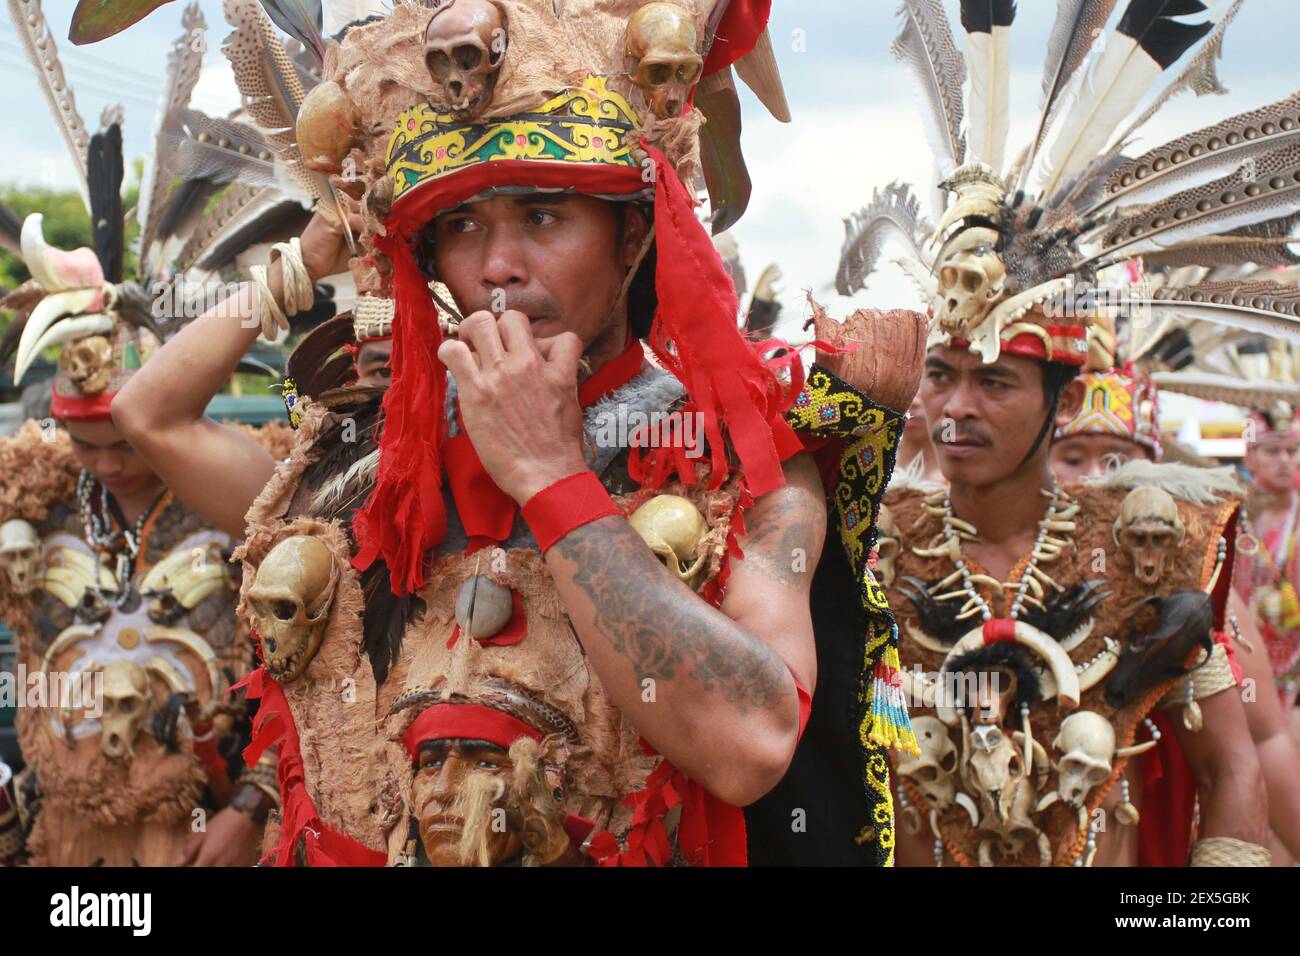 Part of the rituals of the indigenous Dayak, as homage to the ancestor and God, in the event Gawai Dayak Week, which will took place in Pontianak, Indonesia between May 20 and 27, 2015. The Dayak hold this event every year, with the hope of abundant harvests and fertile soil. (Photo by Yohanes Kurnia Irawan/Pacific Press) *** Please Use Credit from Credit Field *** Stock Photo